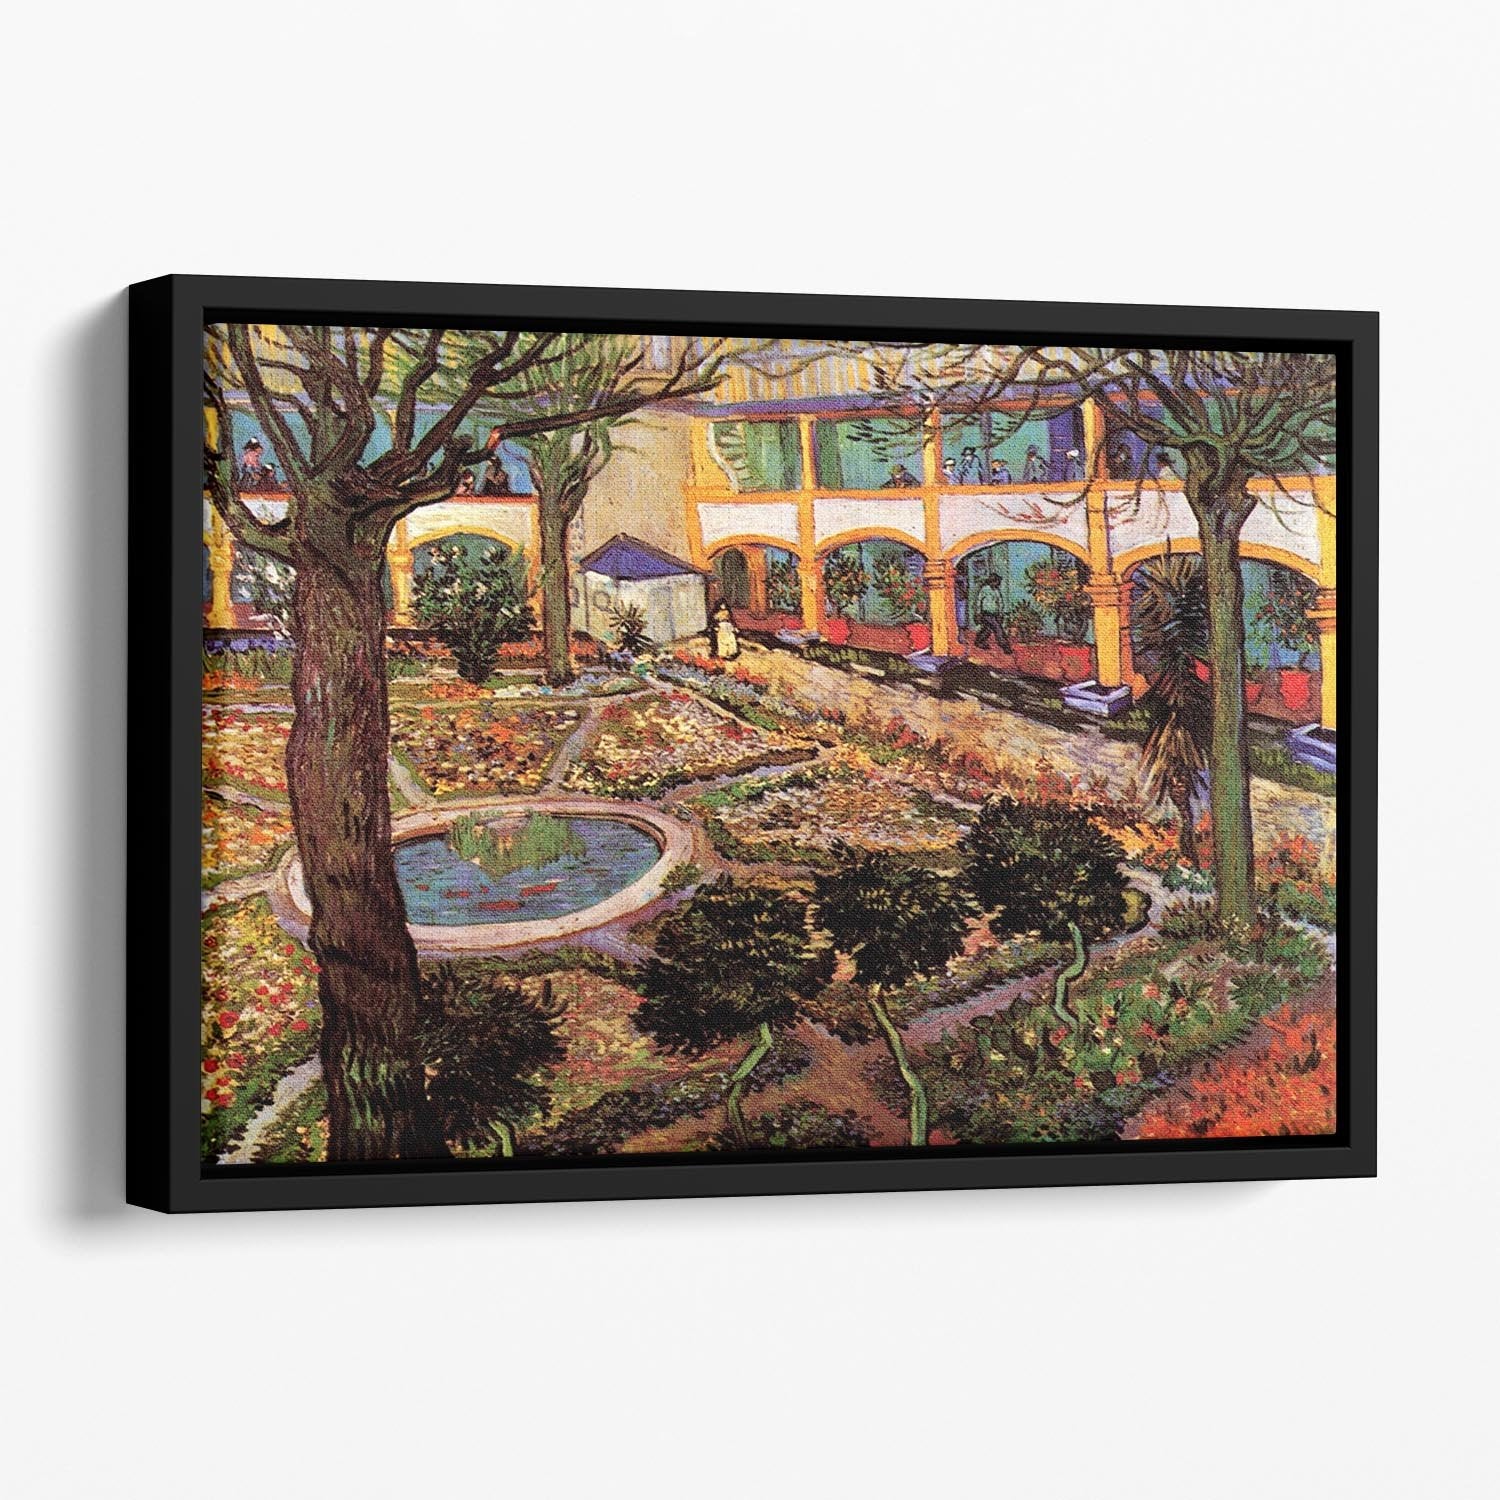 The Courtyard of the Hospital at Arles by Van Gogh Floating Framed Canvas